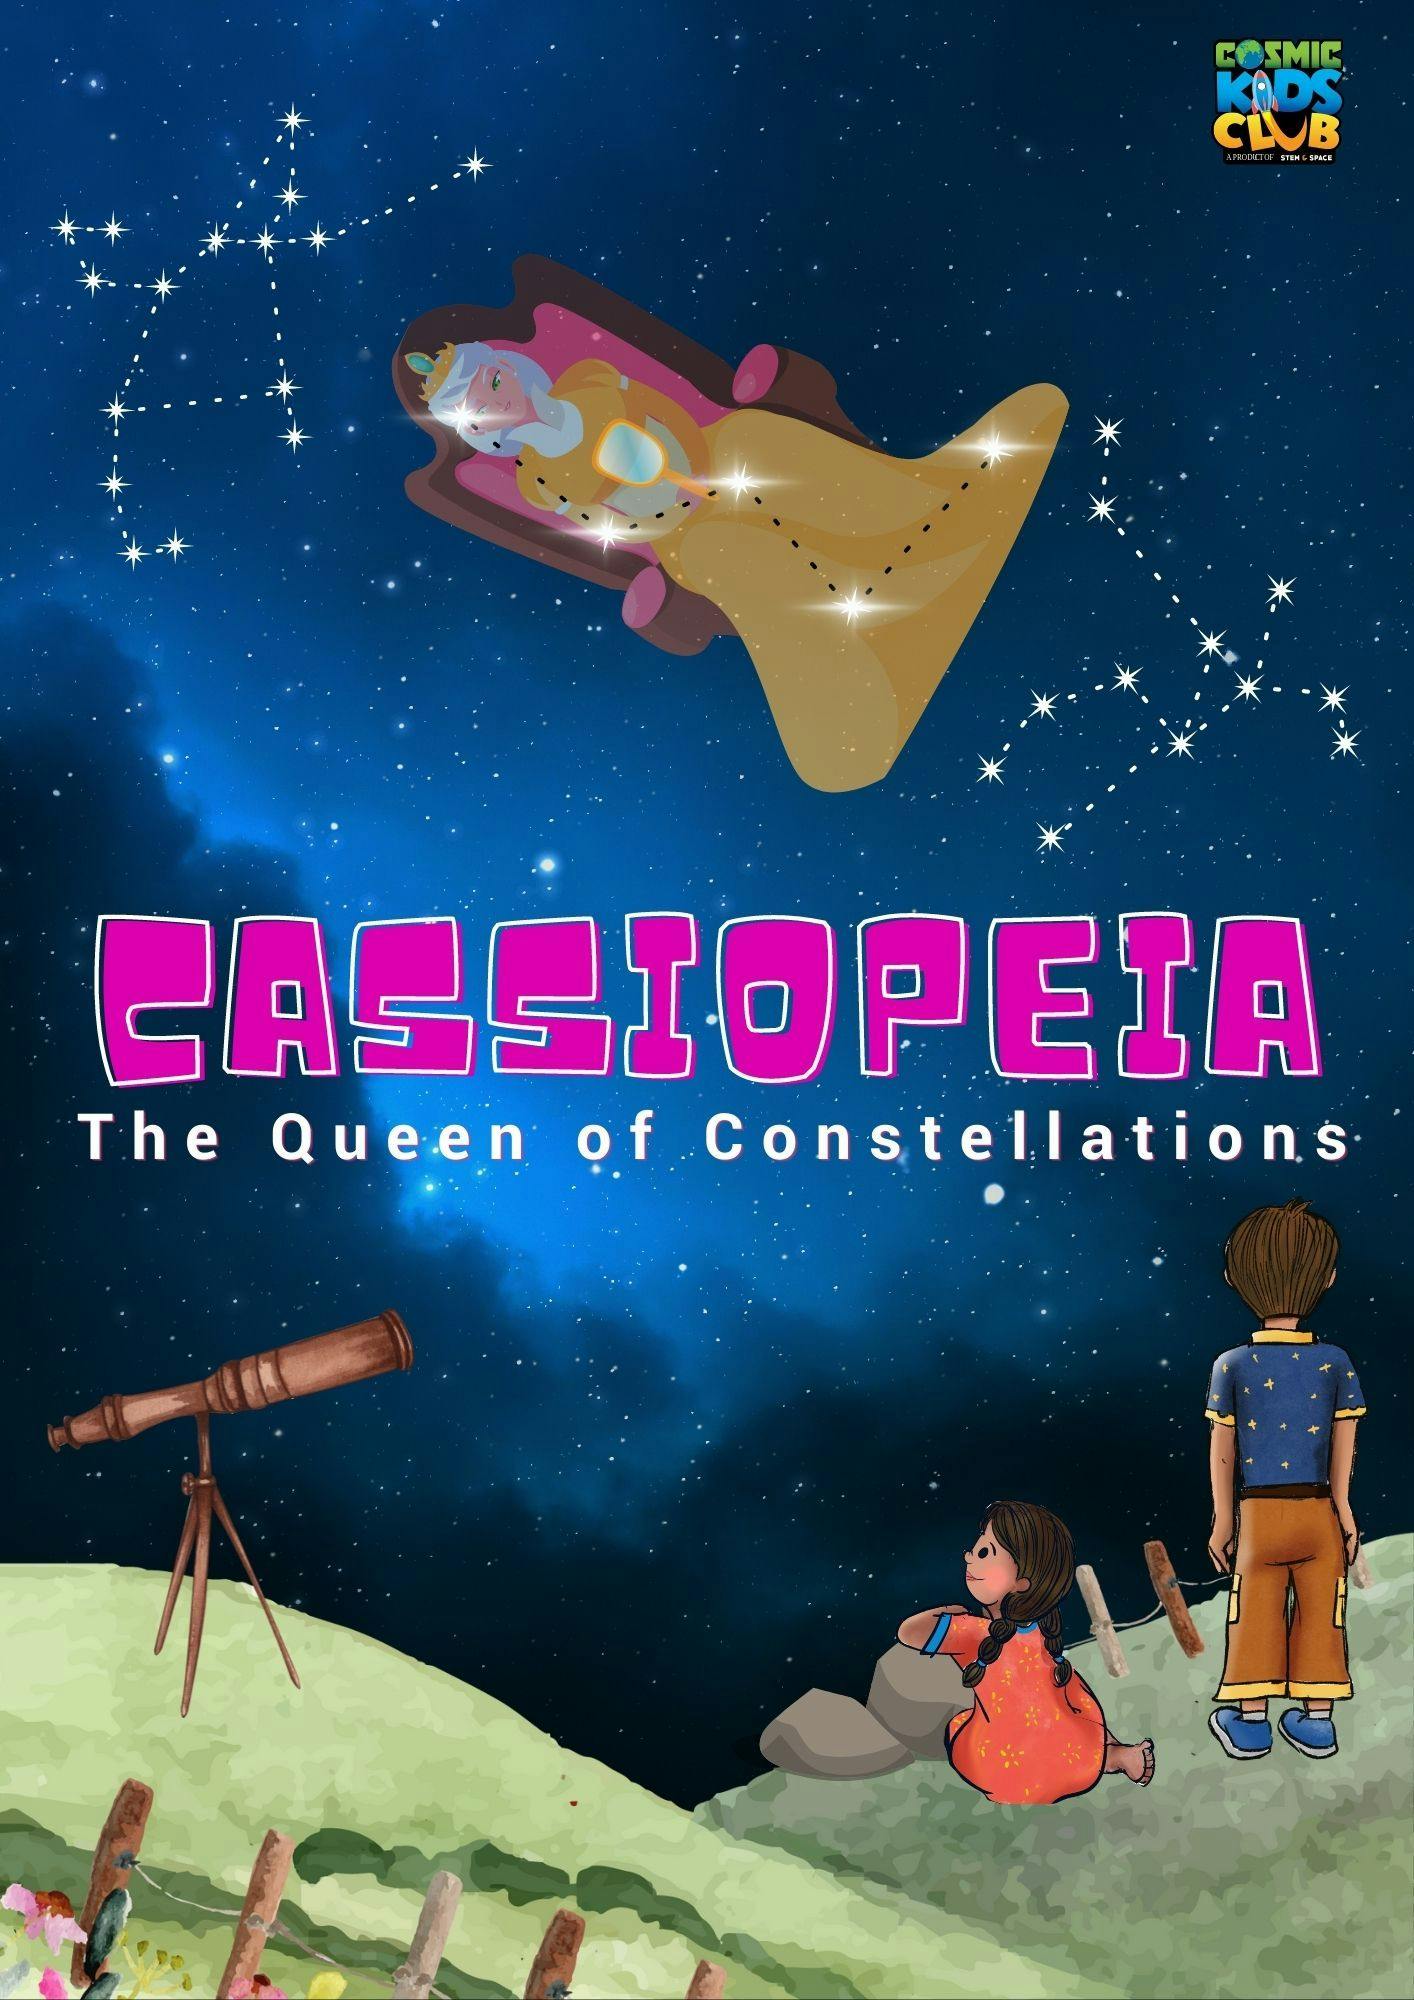 Cassiopeia: The Queen of Constellations